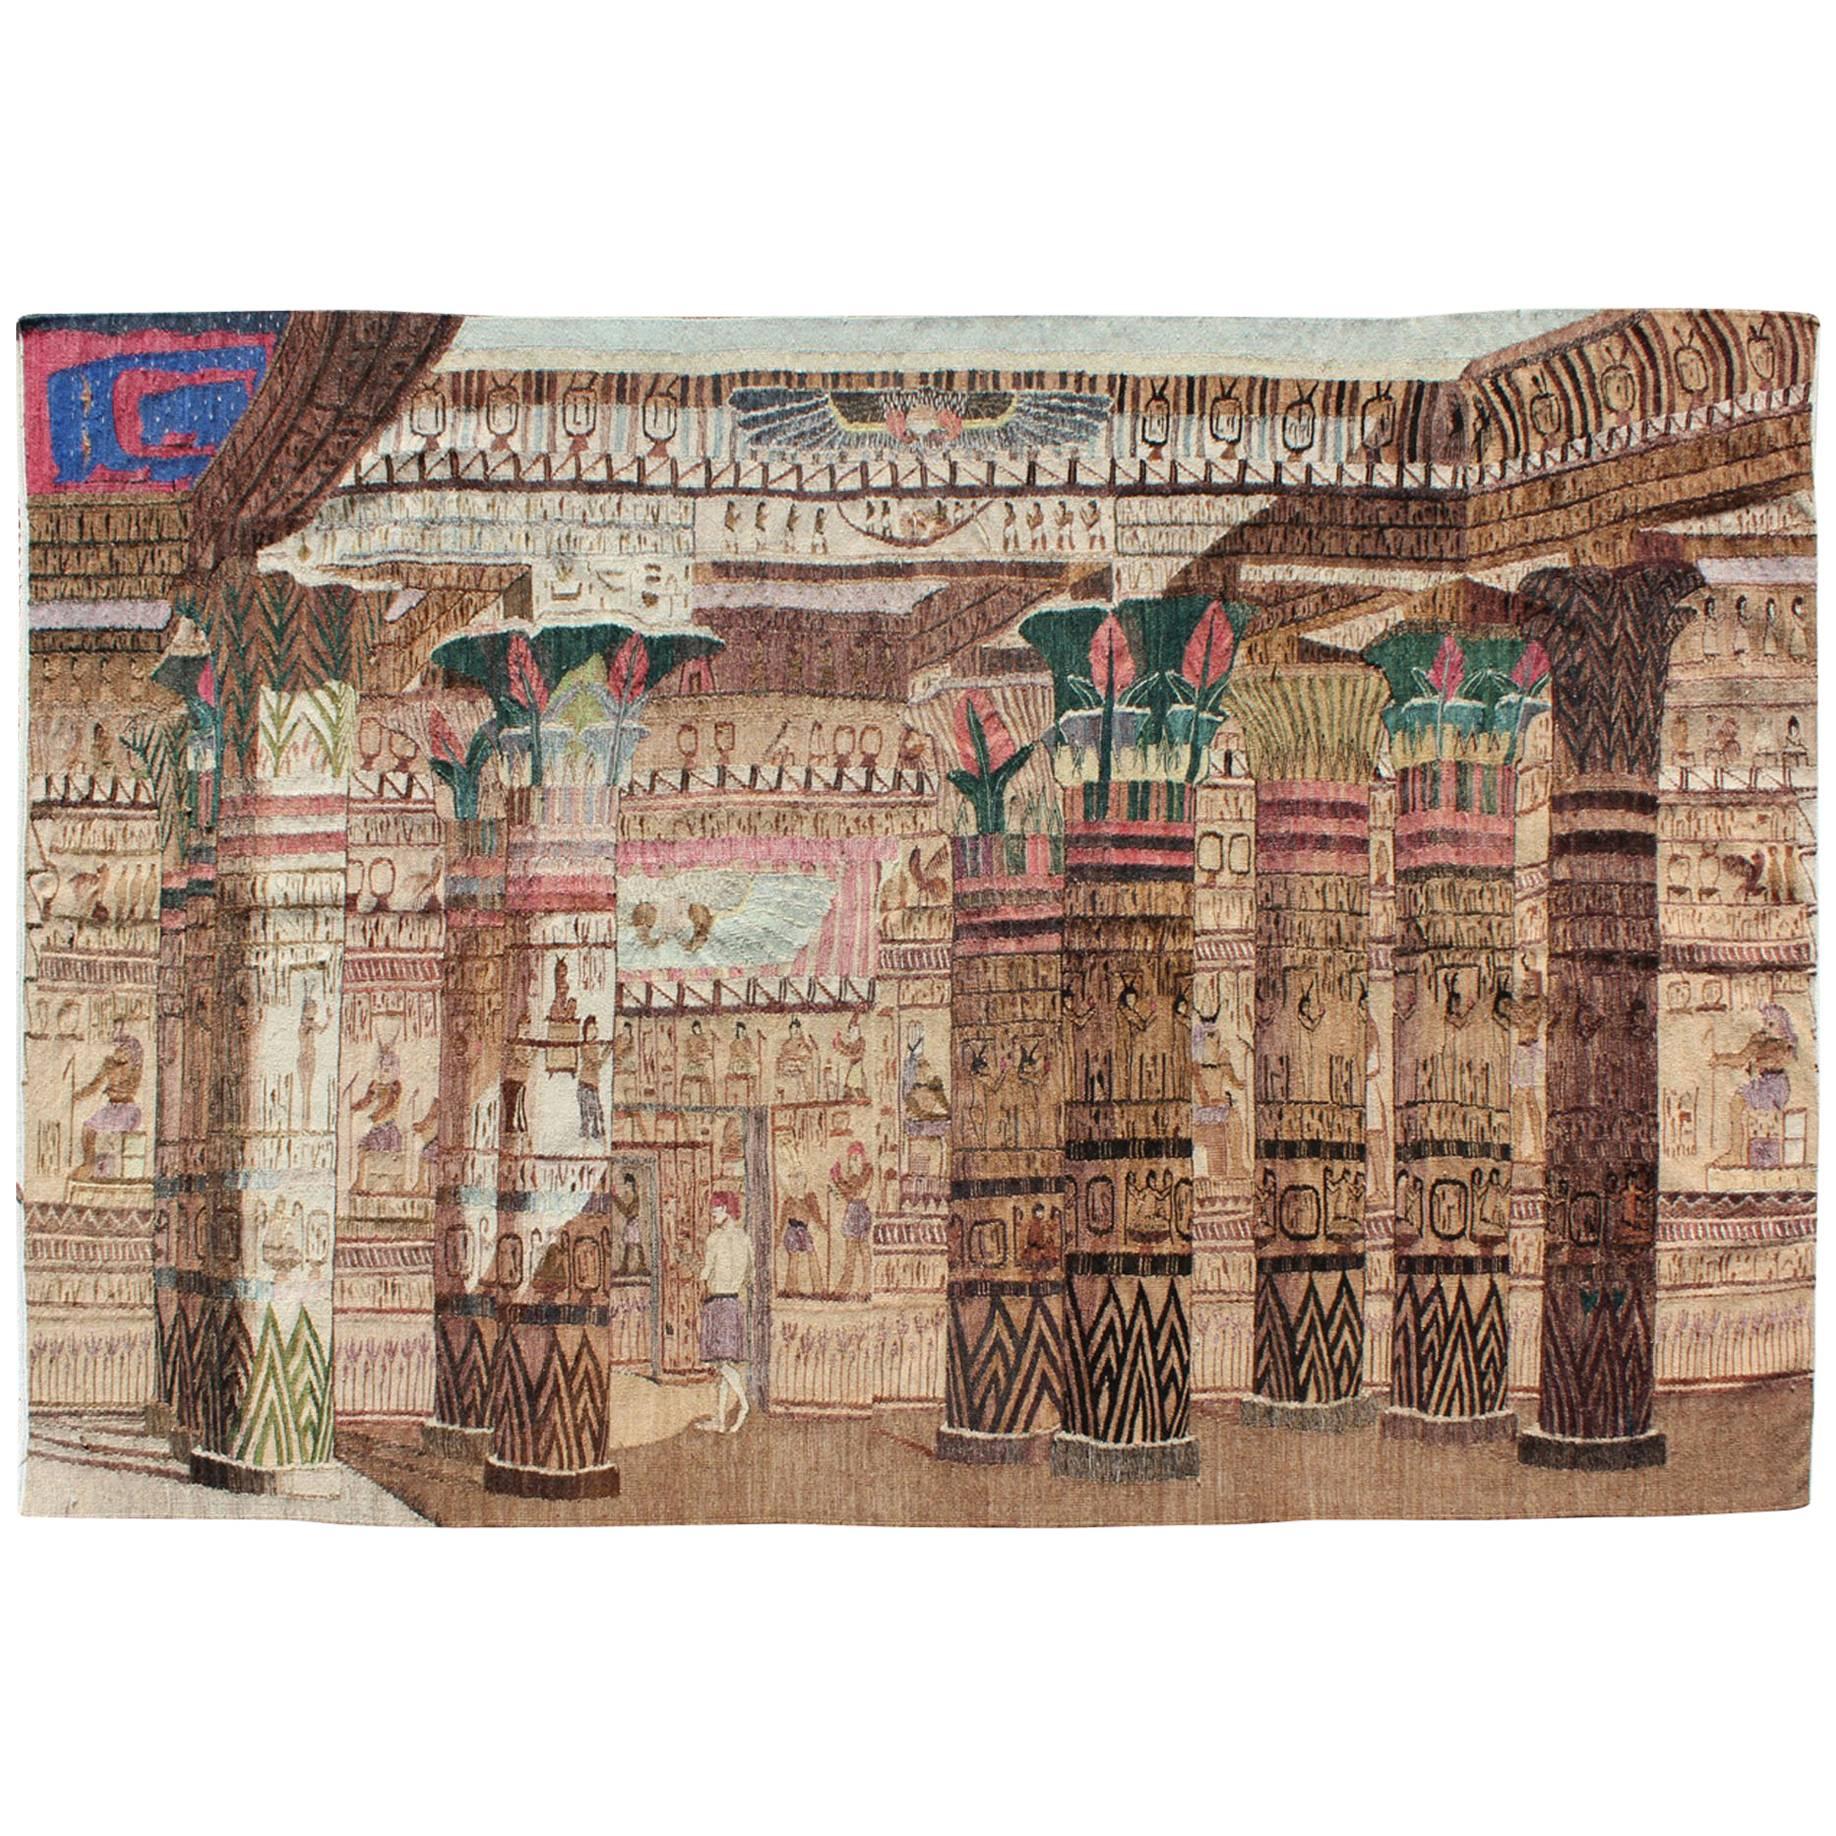 Rare Vintage Tapestry with Exquisite Scene of Egyptian Architecture and Columns For Sale